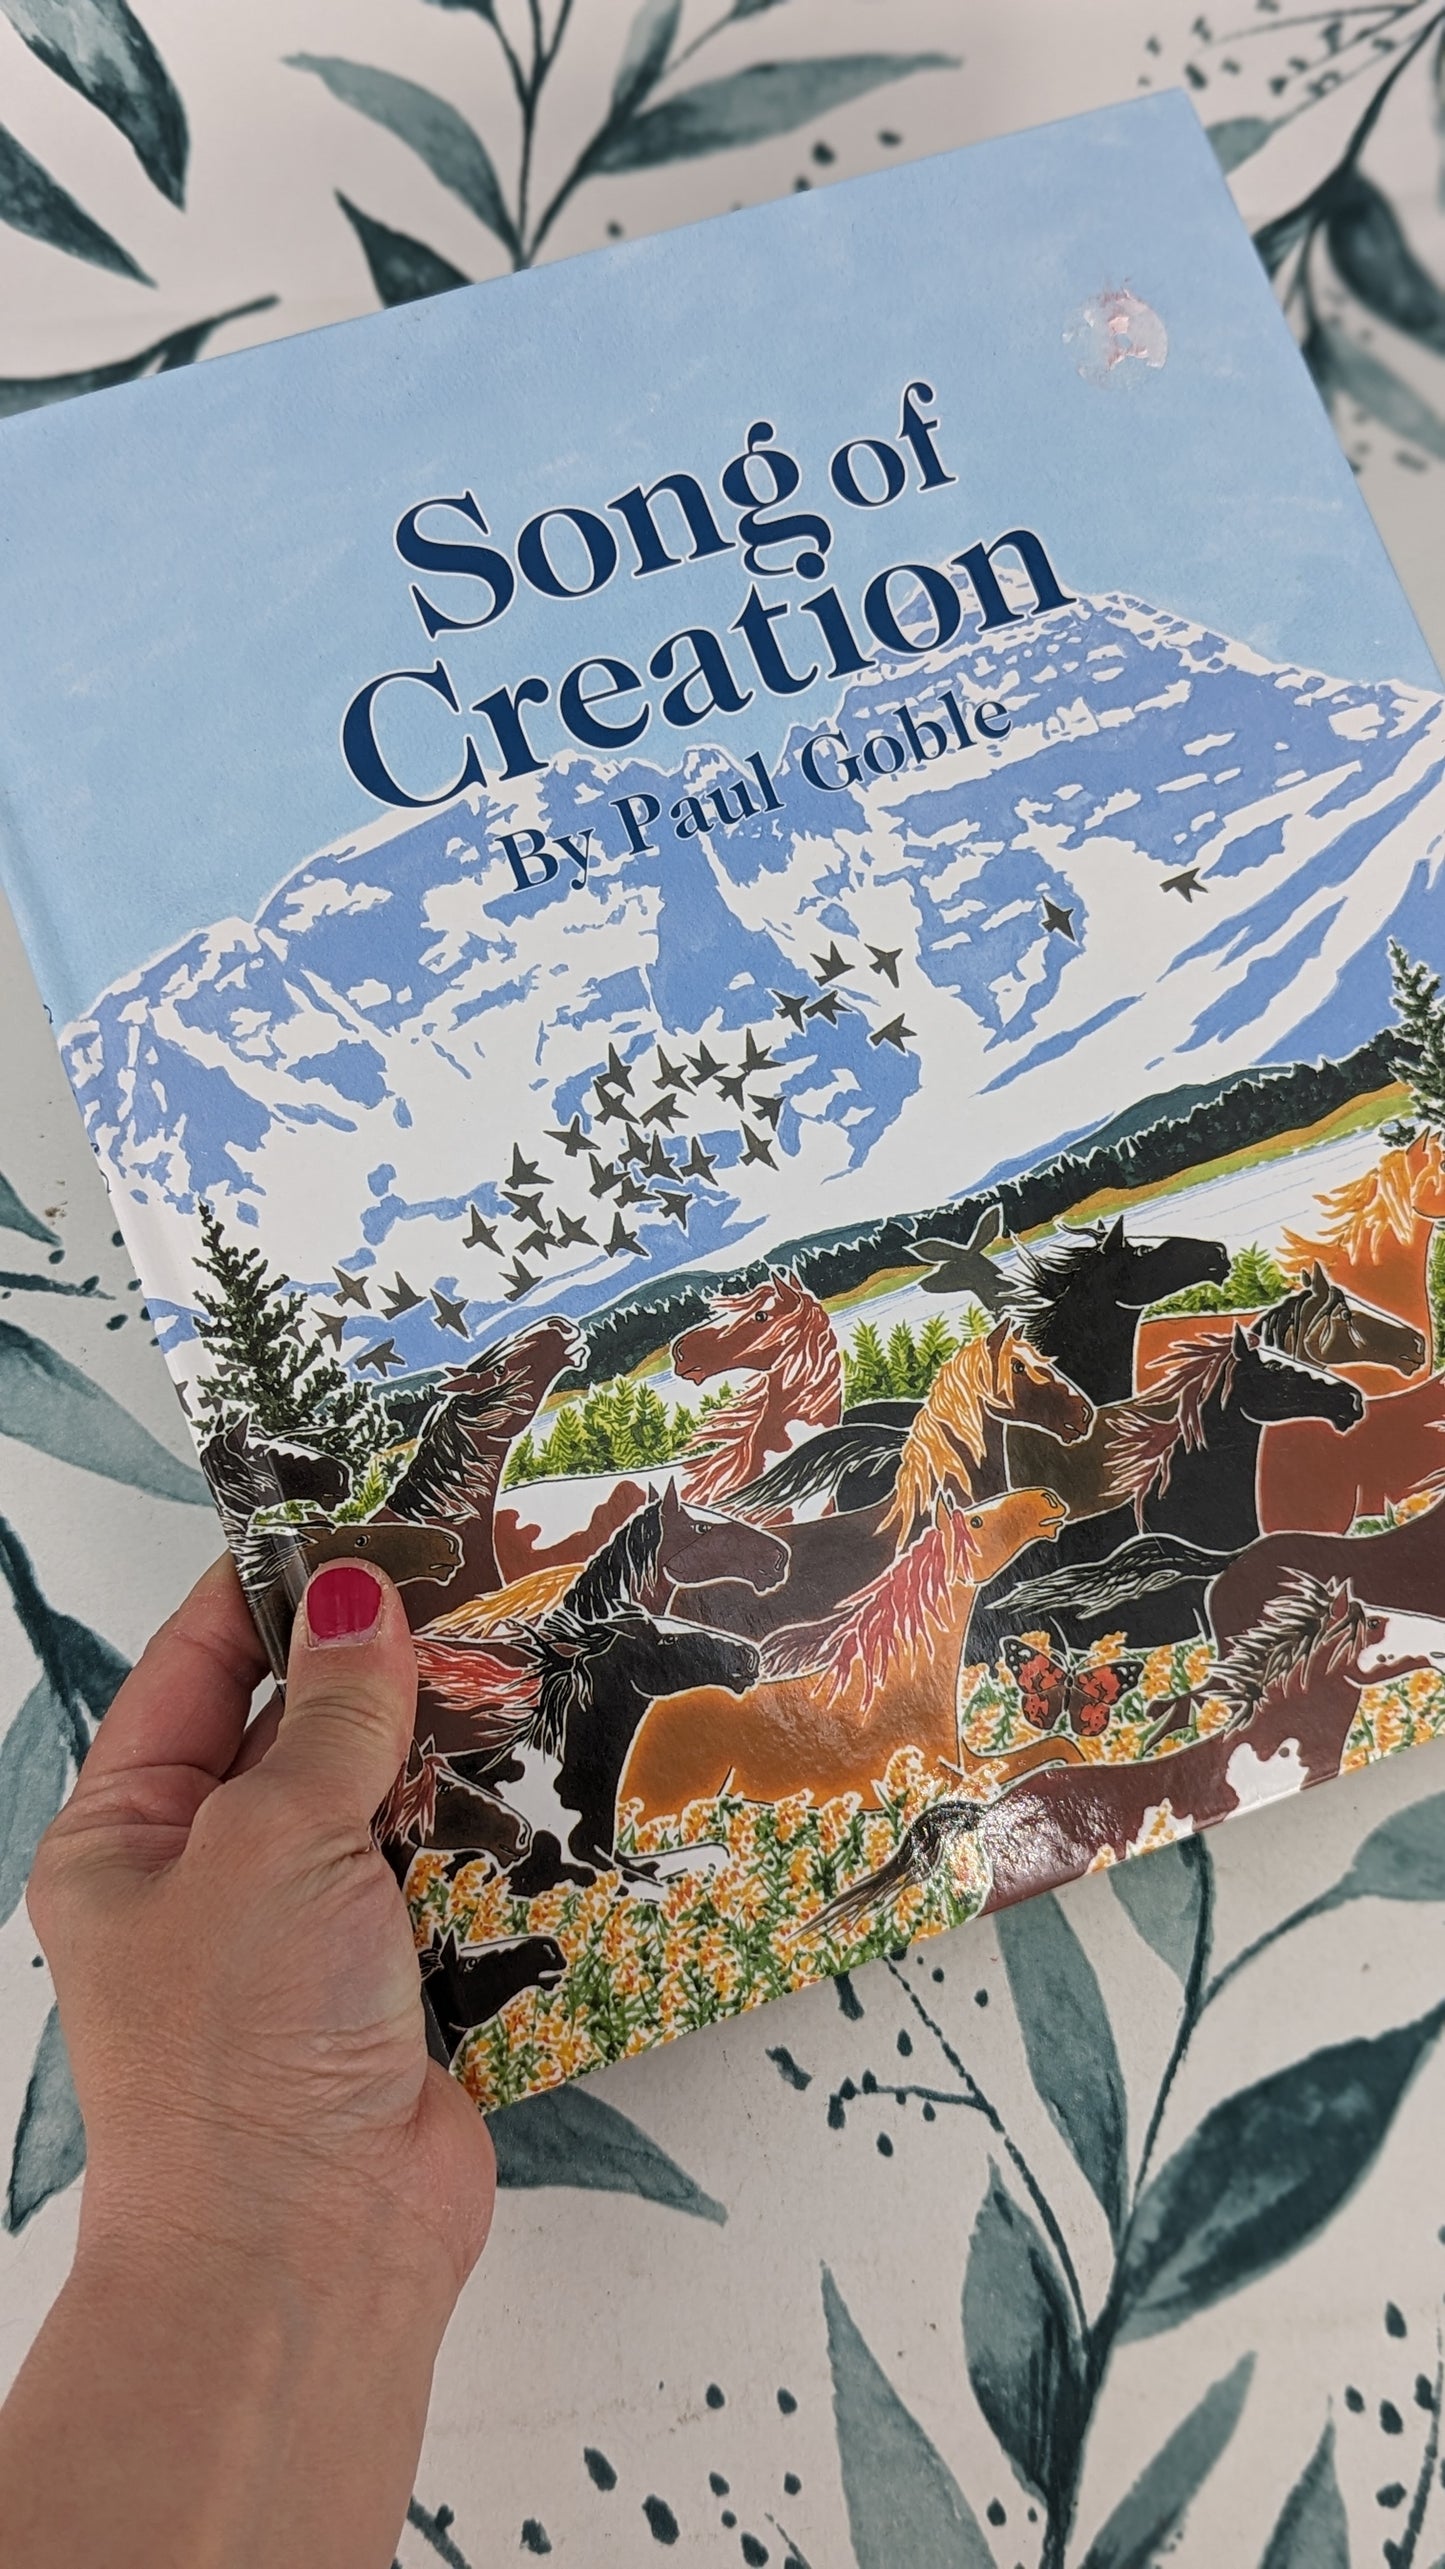 Song of Creation (SIGNED BY AUTHOR)